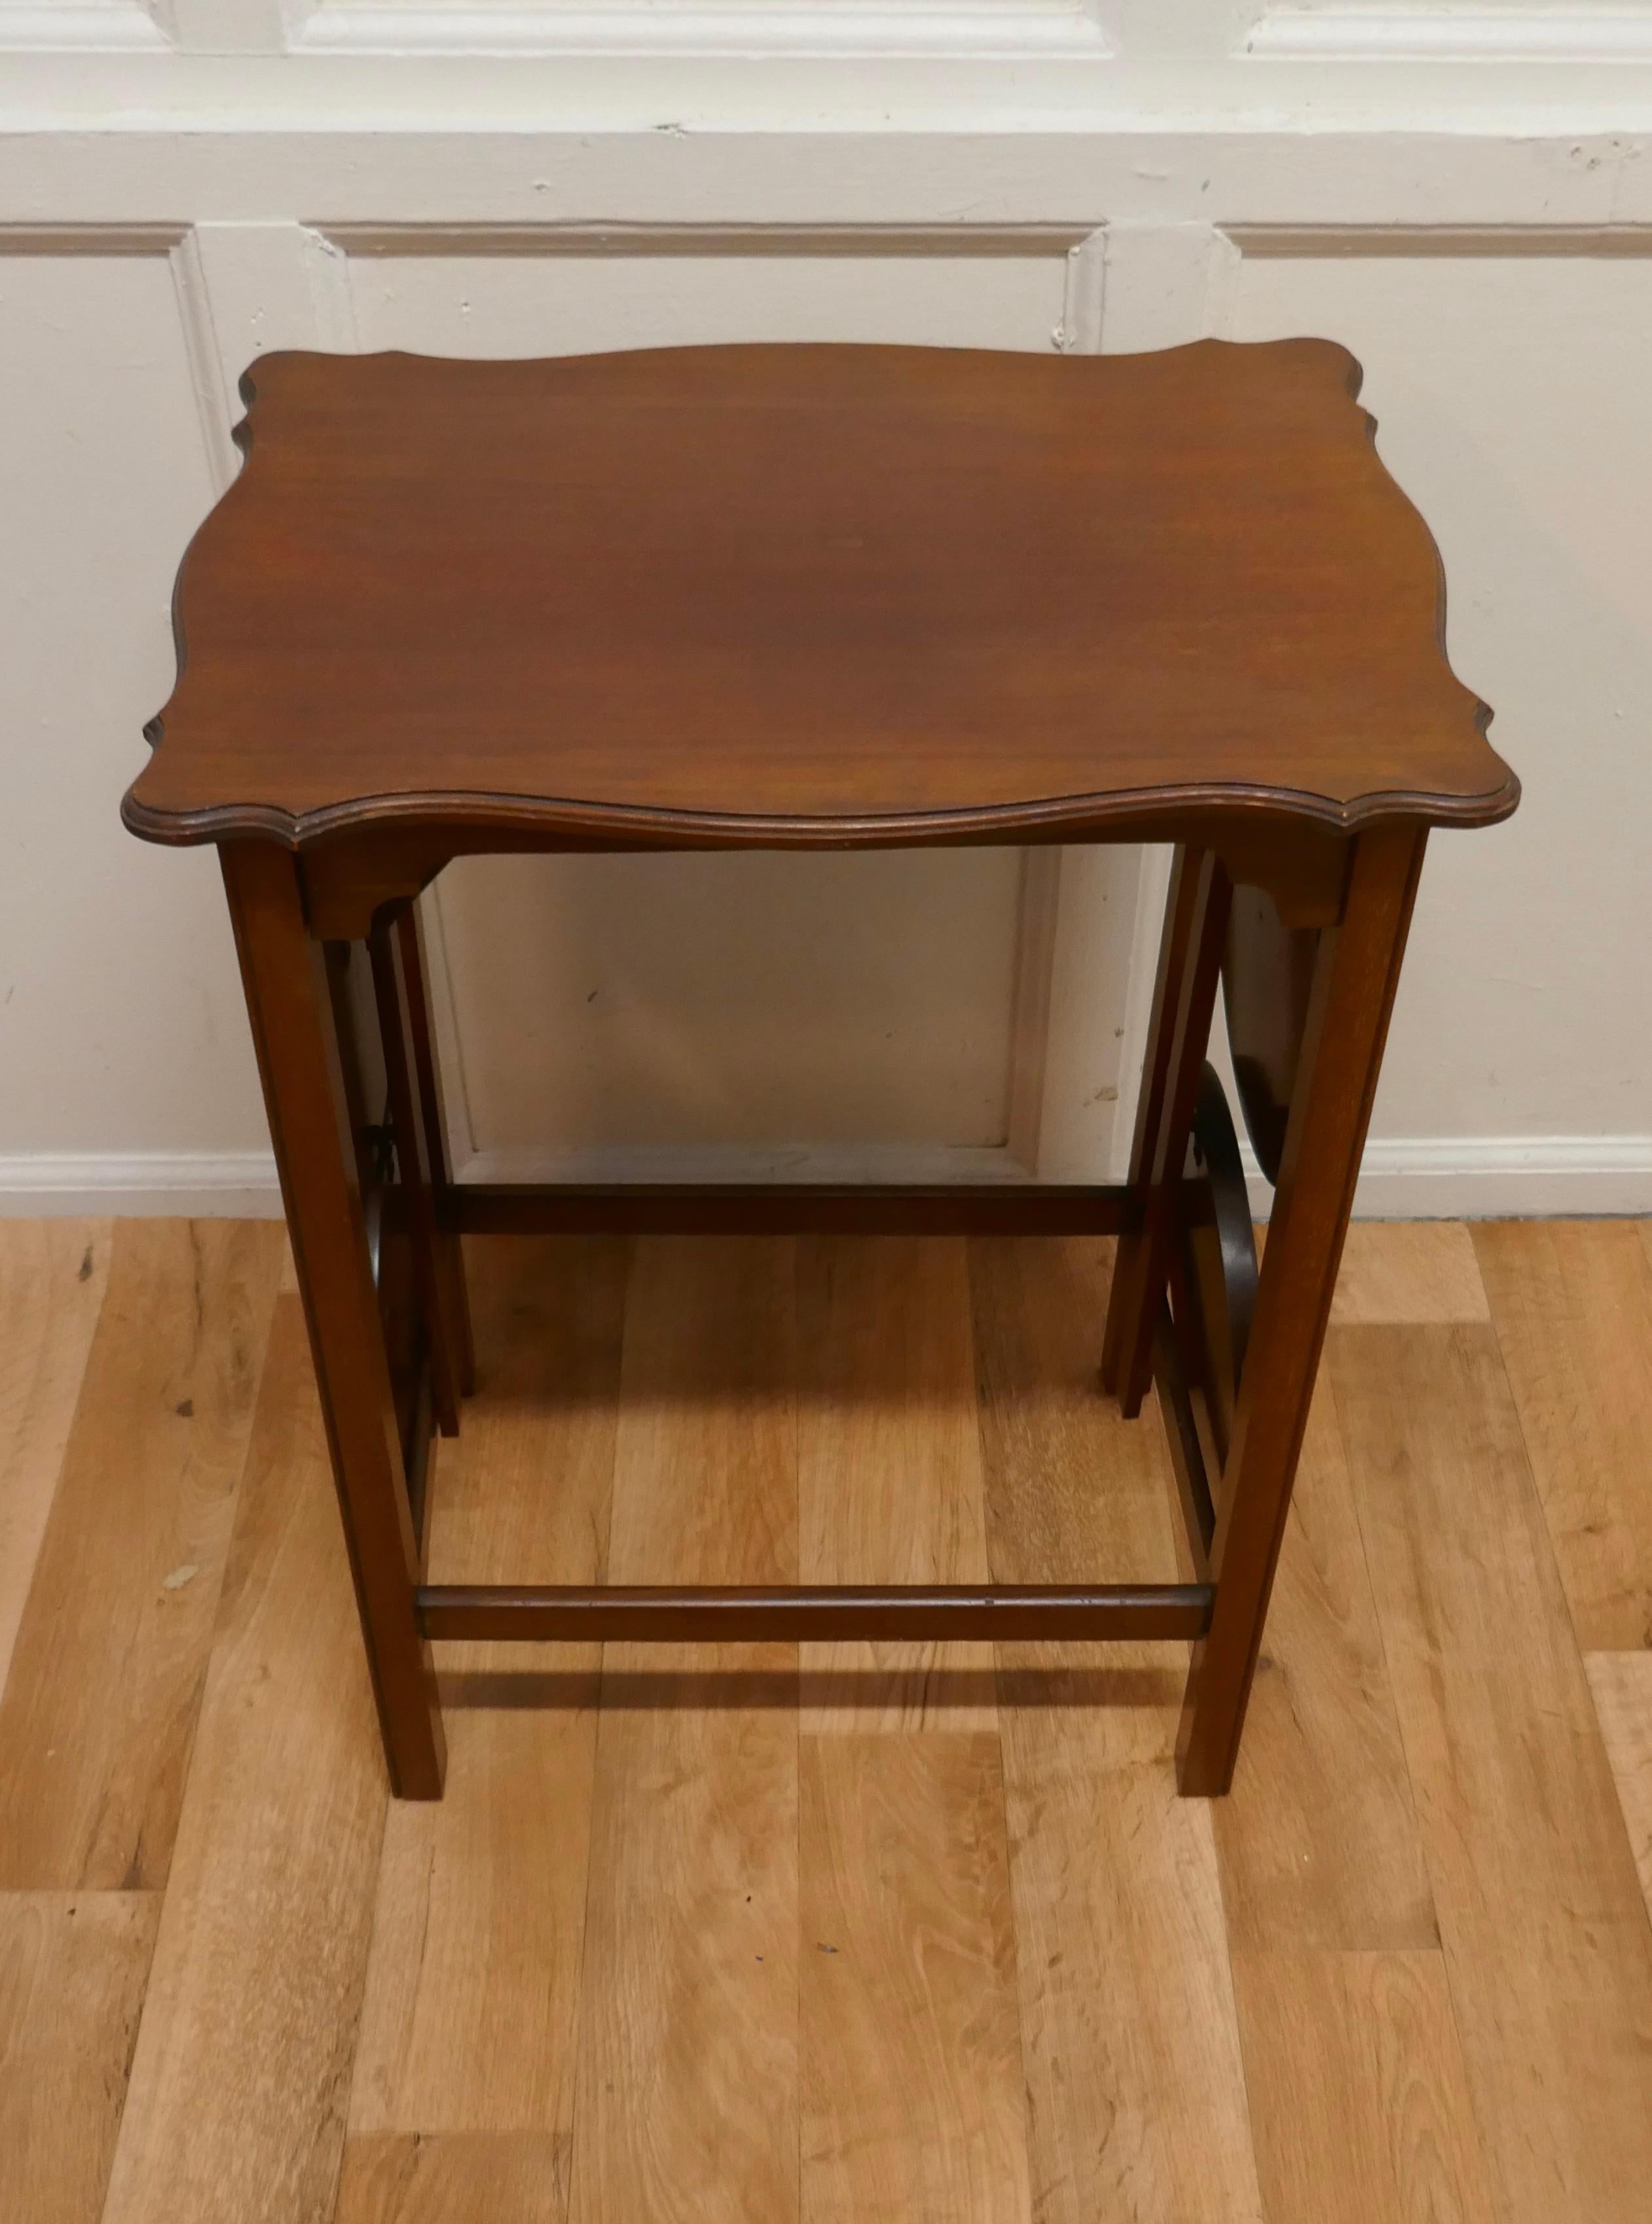 4 Tray Mahogany Table Cake Stand or Dumb Waiter For Sale 3